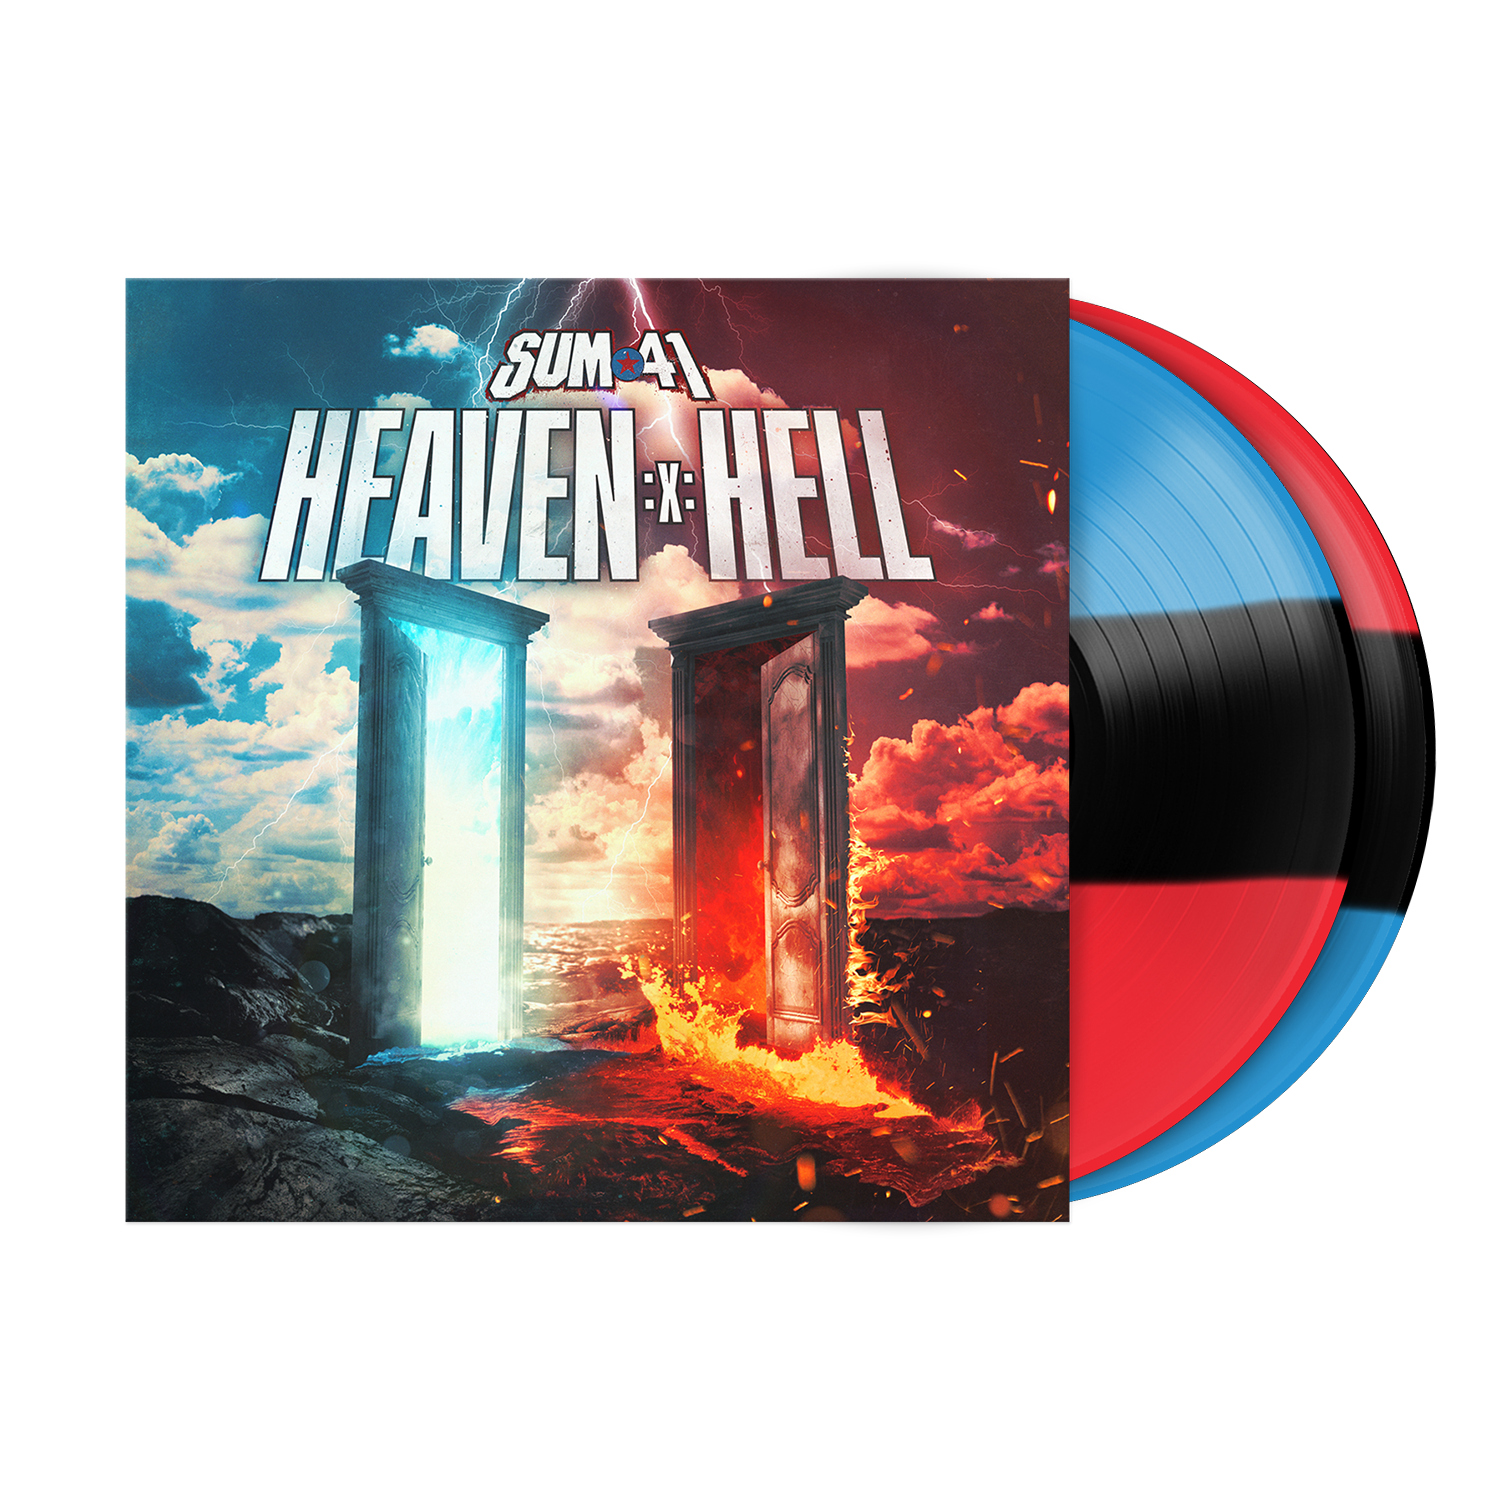 Rock Sound Issue 304 - Sum 41 Cover with 'Heaven :x: Hell' Exclusive LP